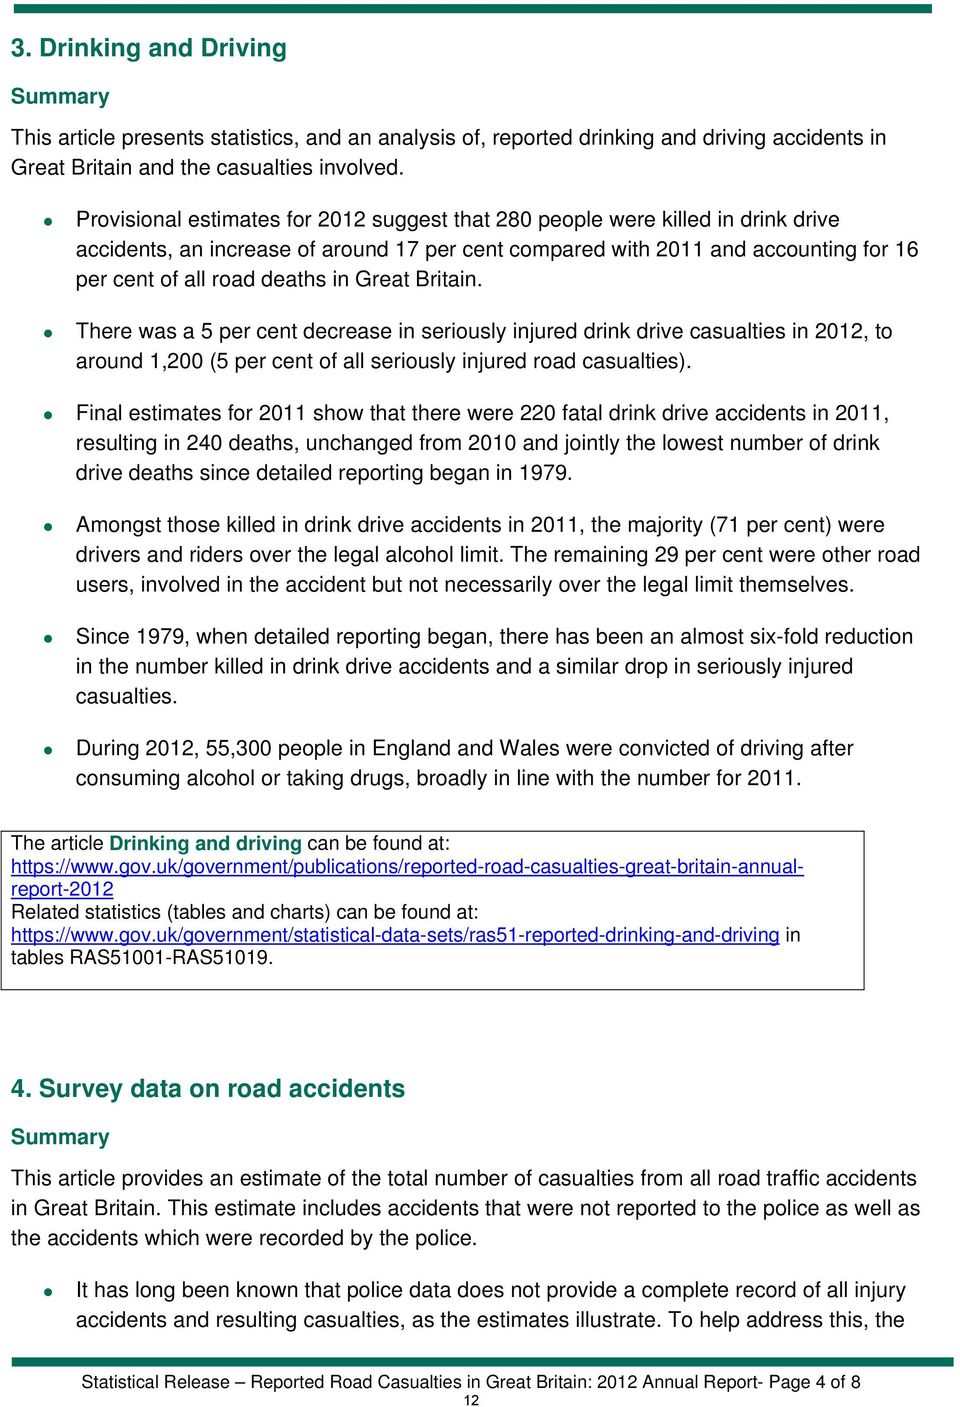 Great Britain. There was a 5 per cent decrease in seriously injured drink drive casualties in 2012, to around 1,200 (5 per cent of all seriously injured road casualties).